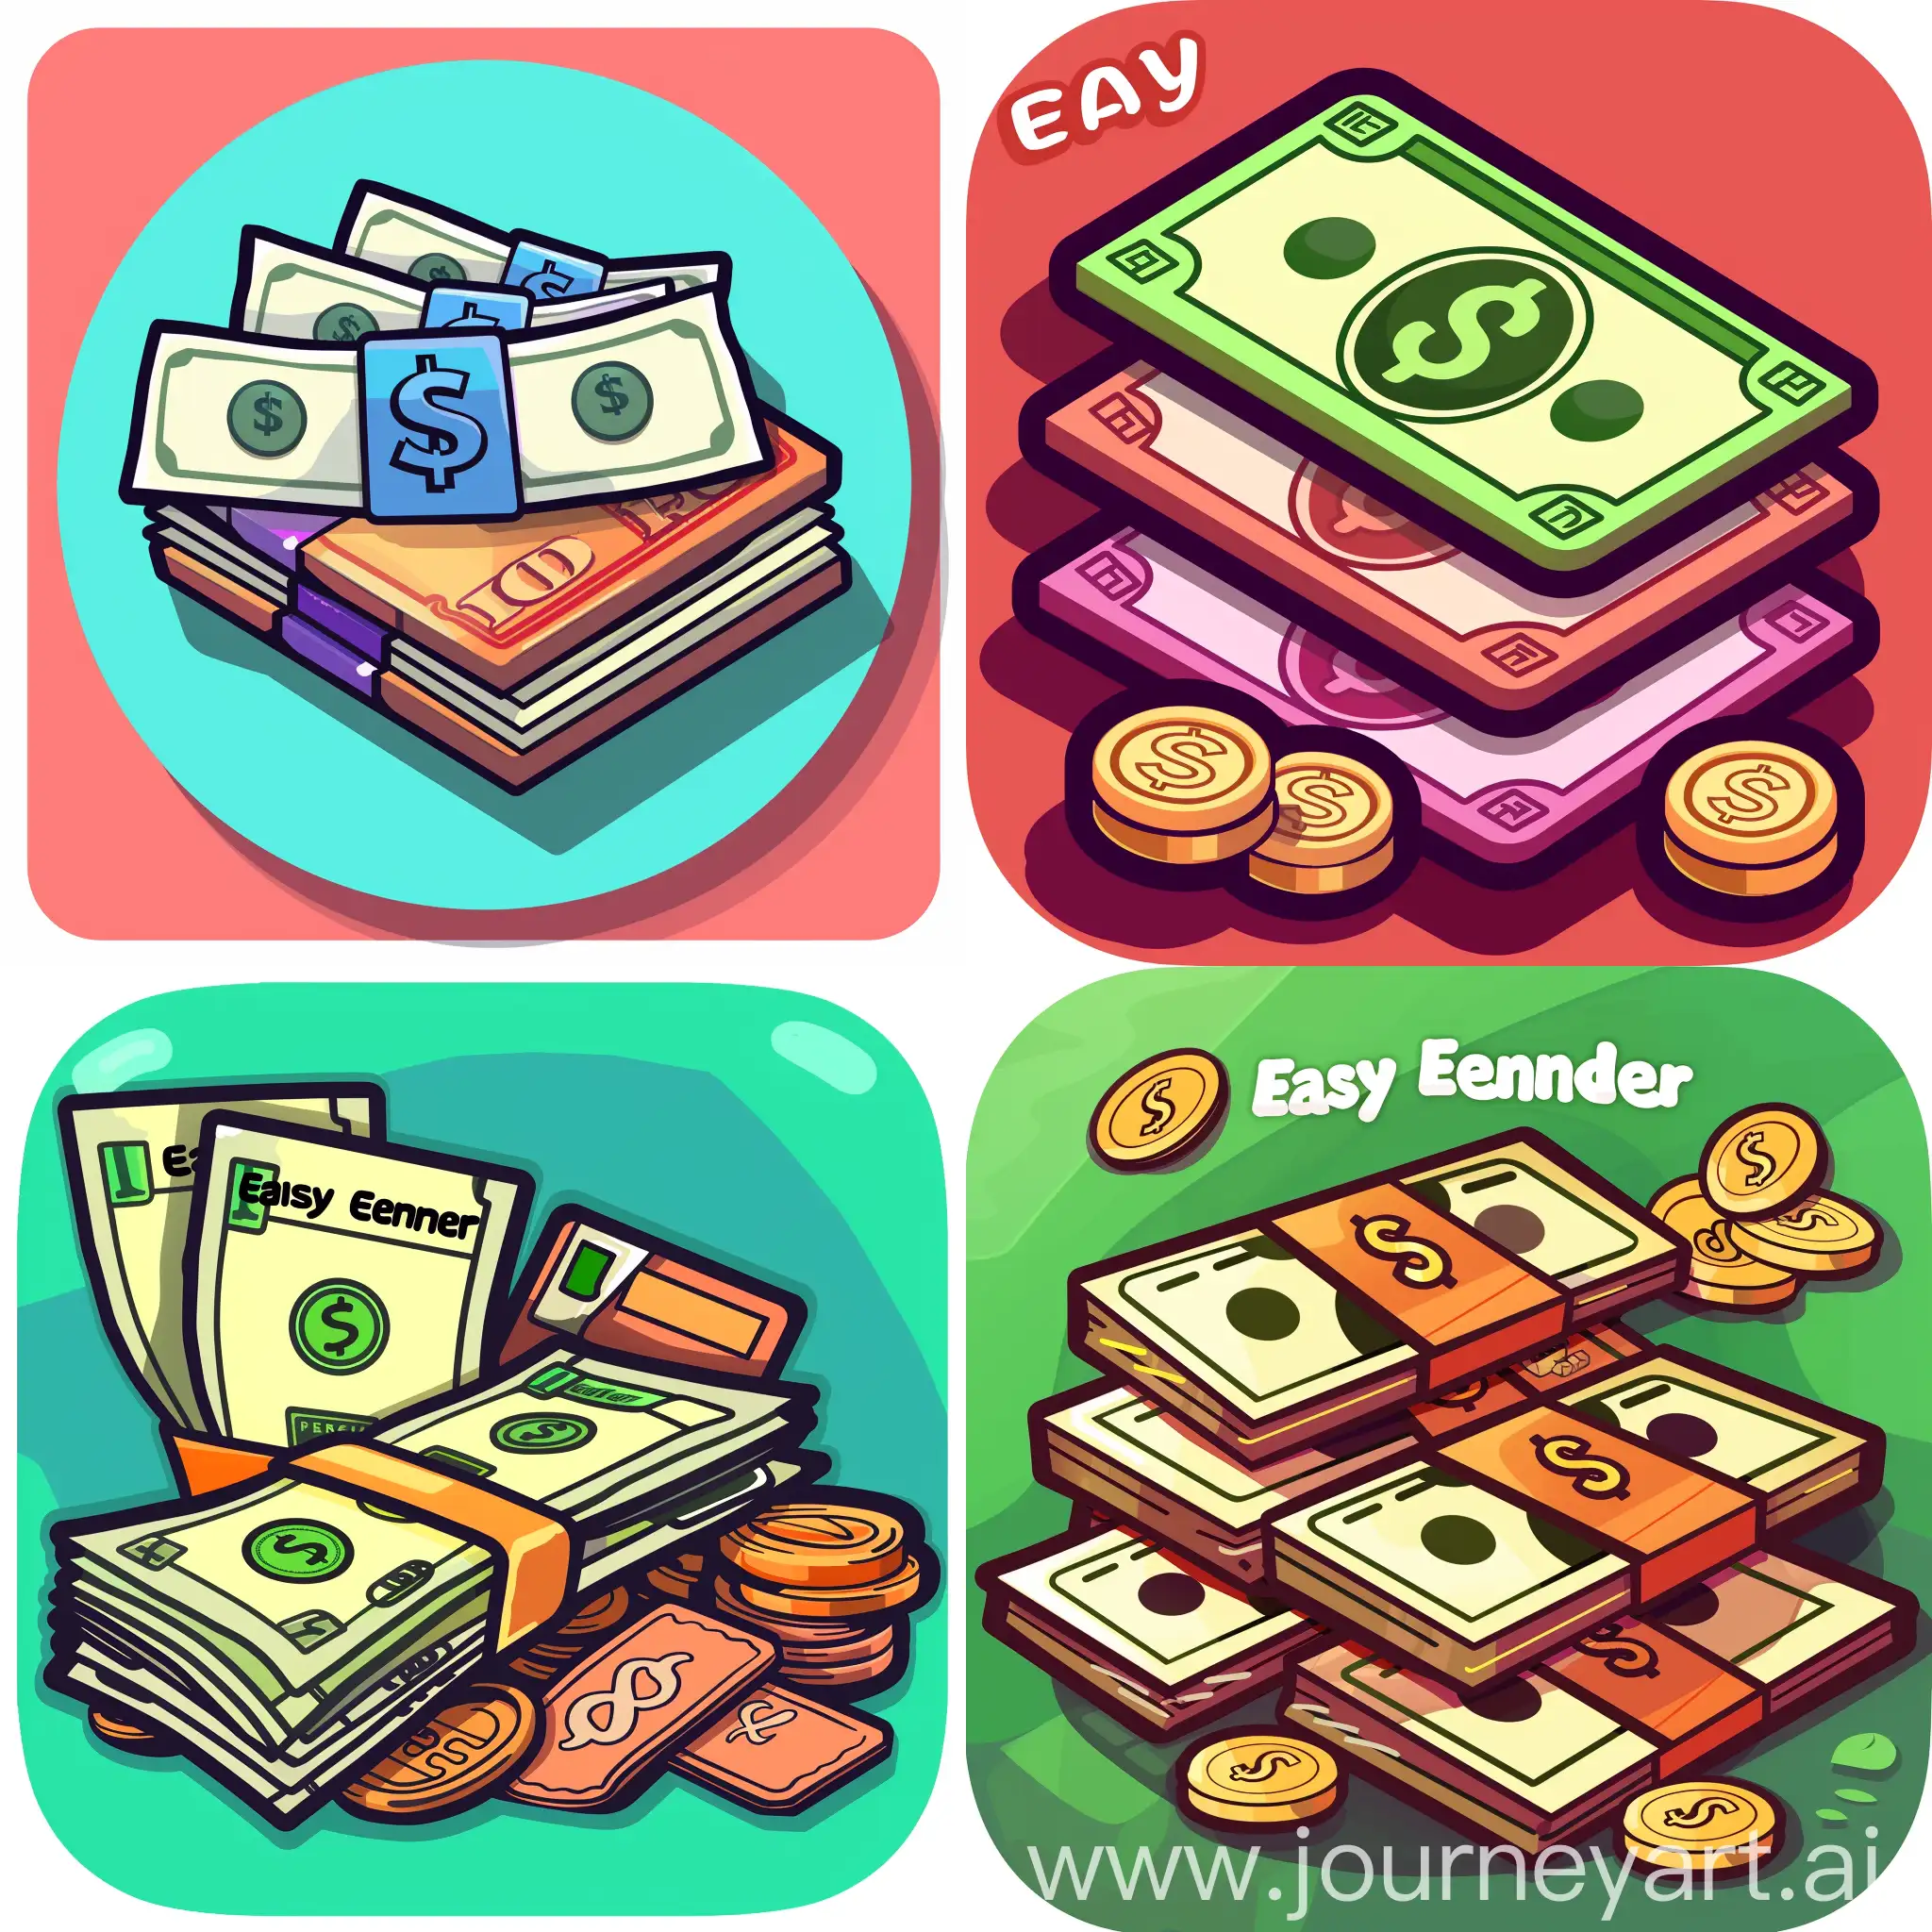 Icon for a game called "Easy Earner," cash and coupons, simple digital art style